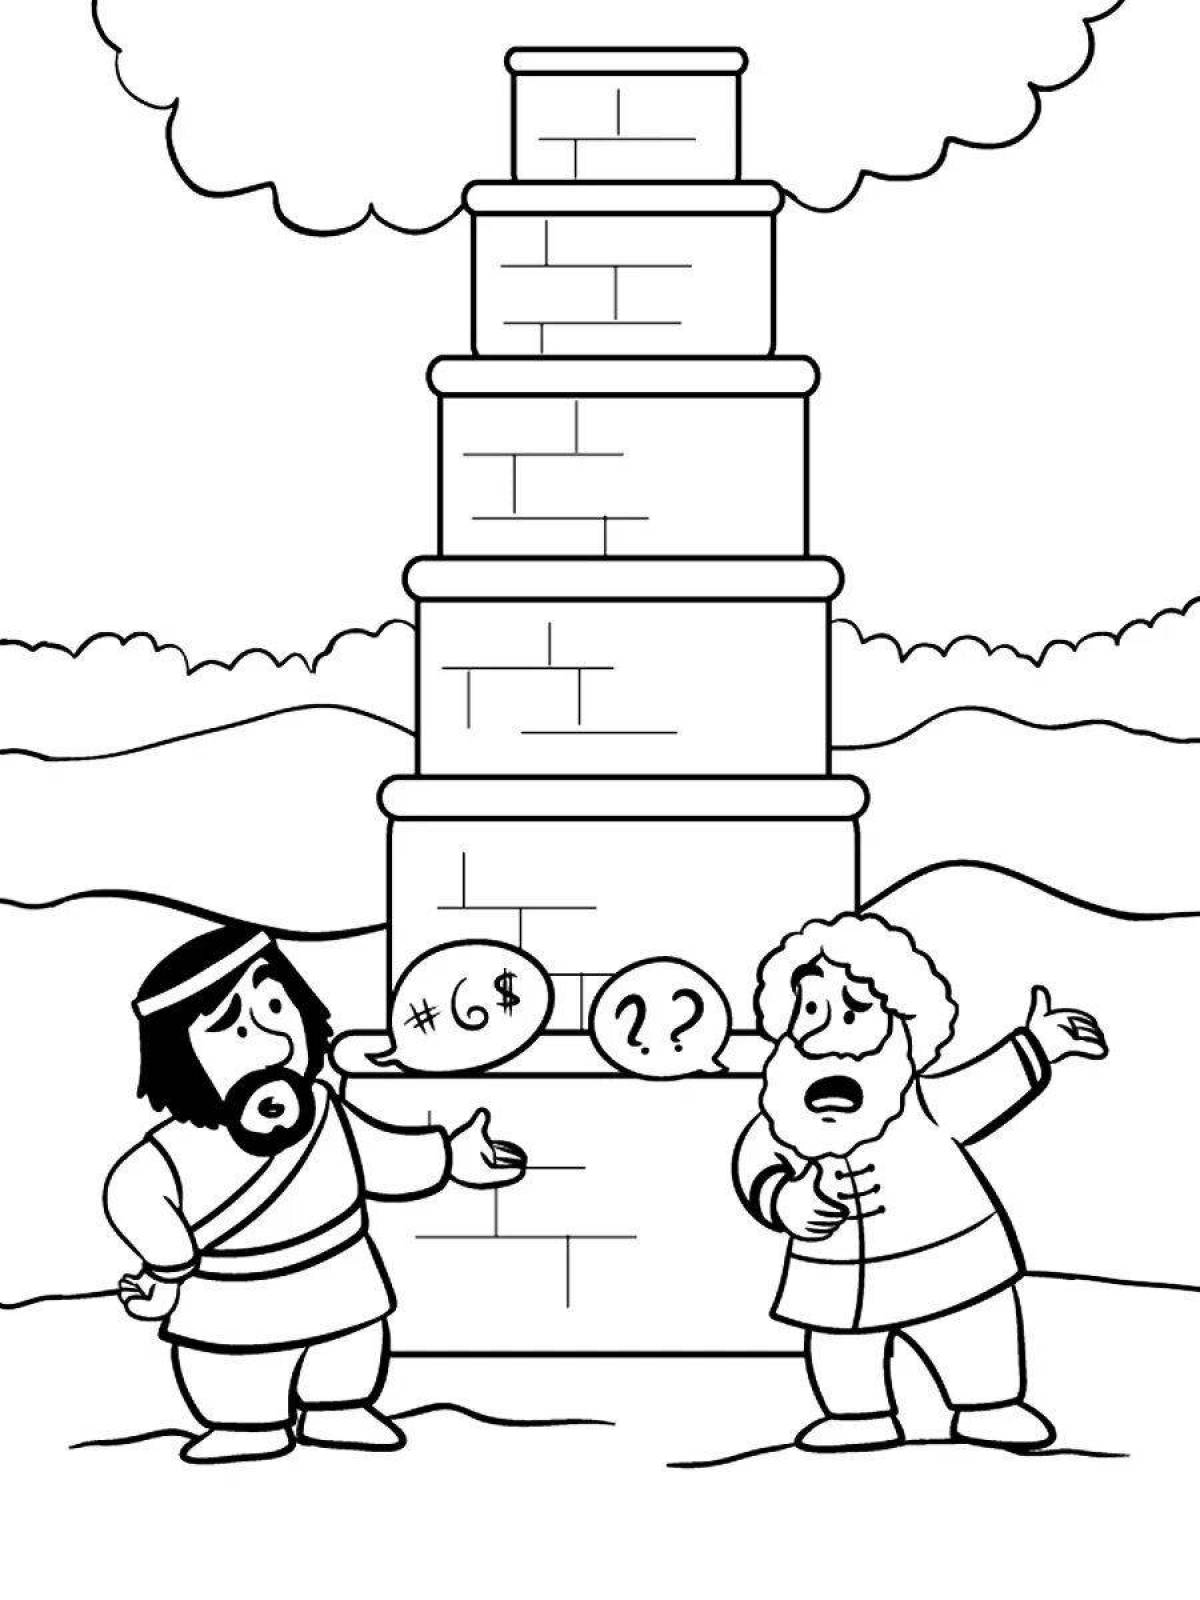 Exciting tower coloring book for kids